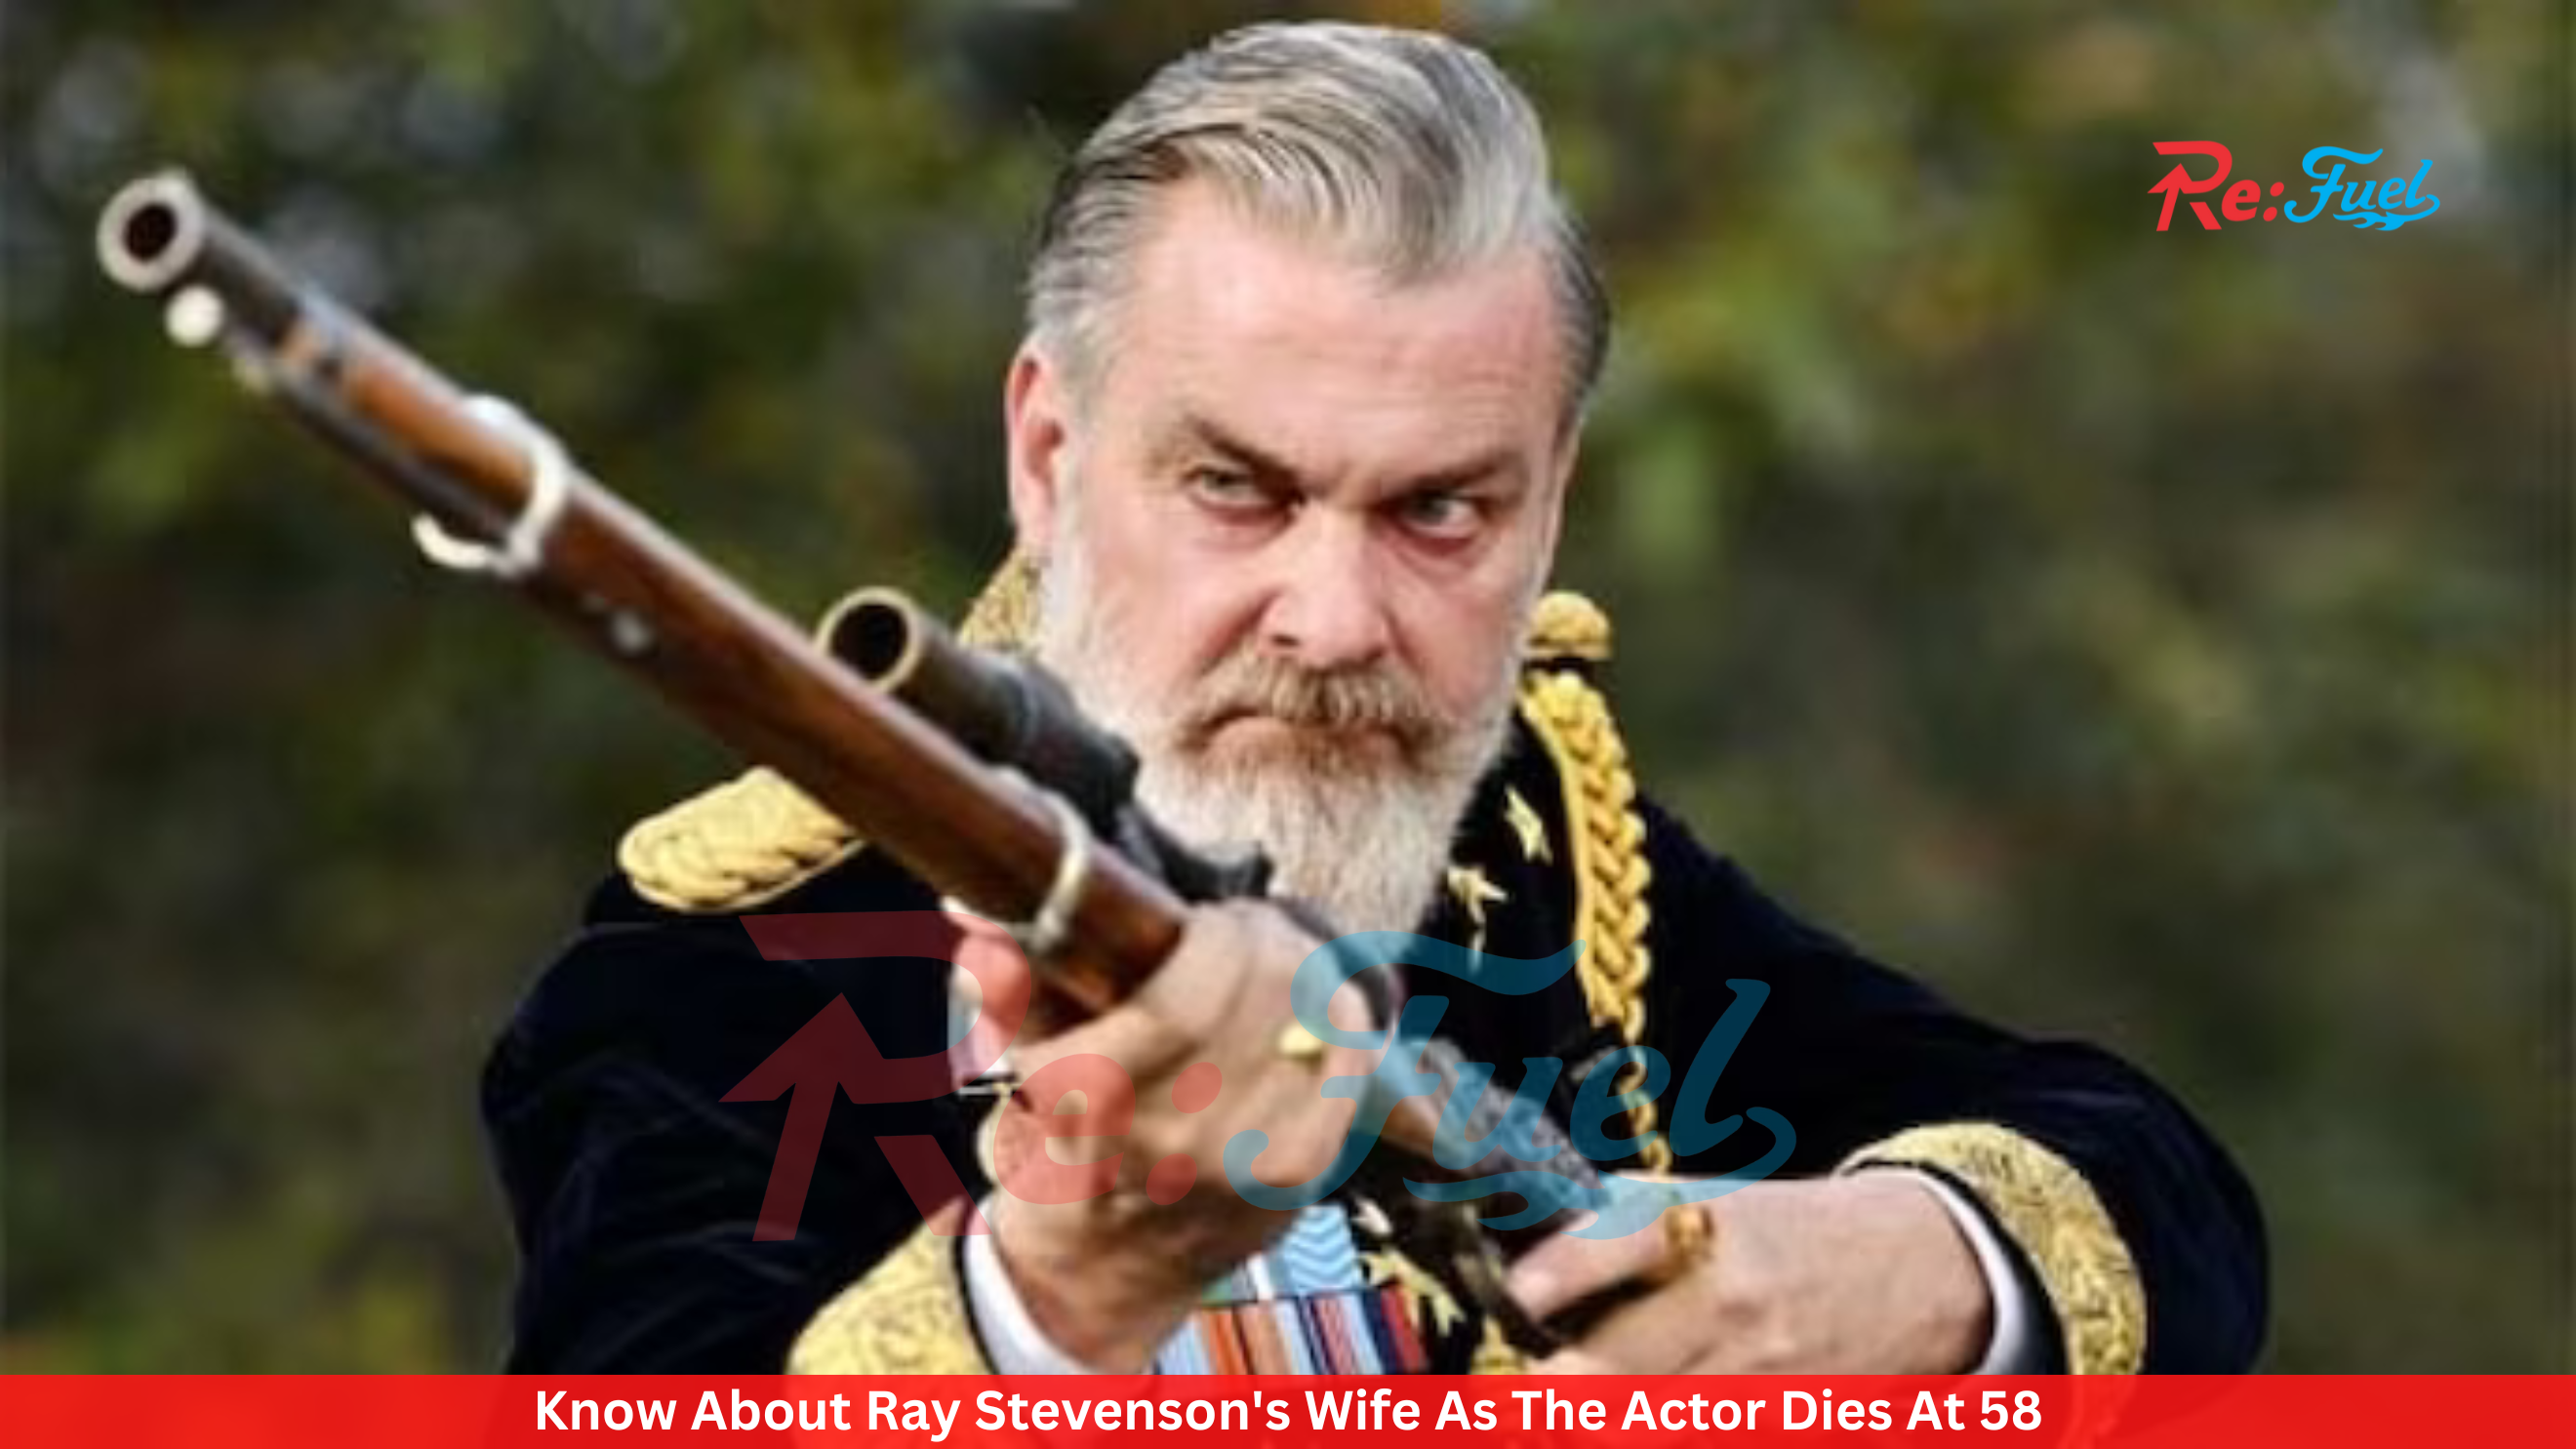 Know About Ray Stevenson's Wife As The Actor Dies At 58